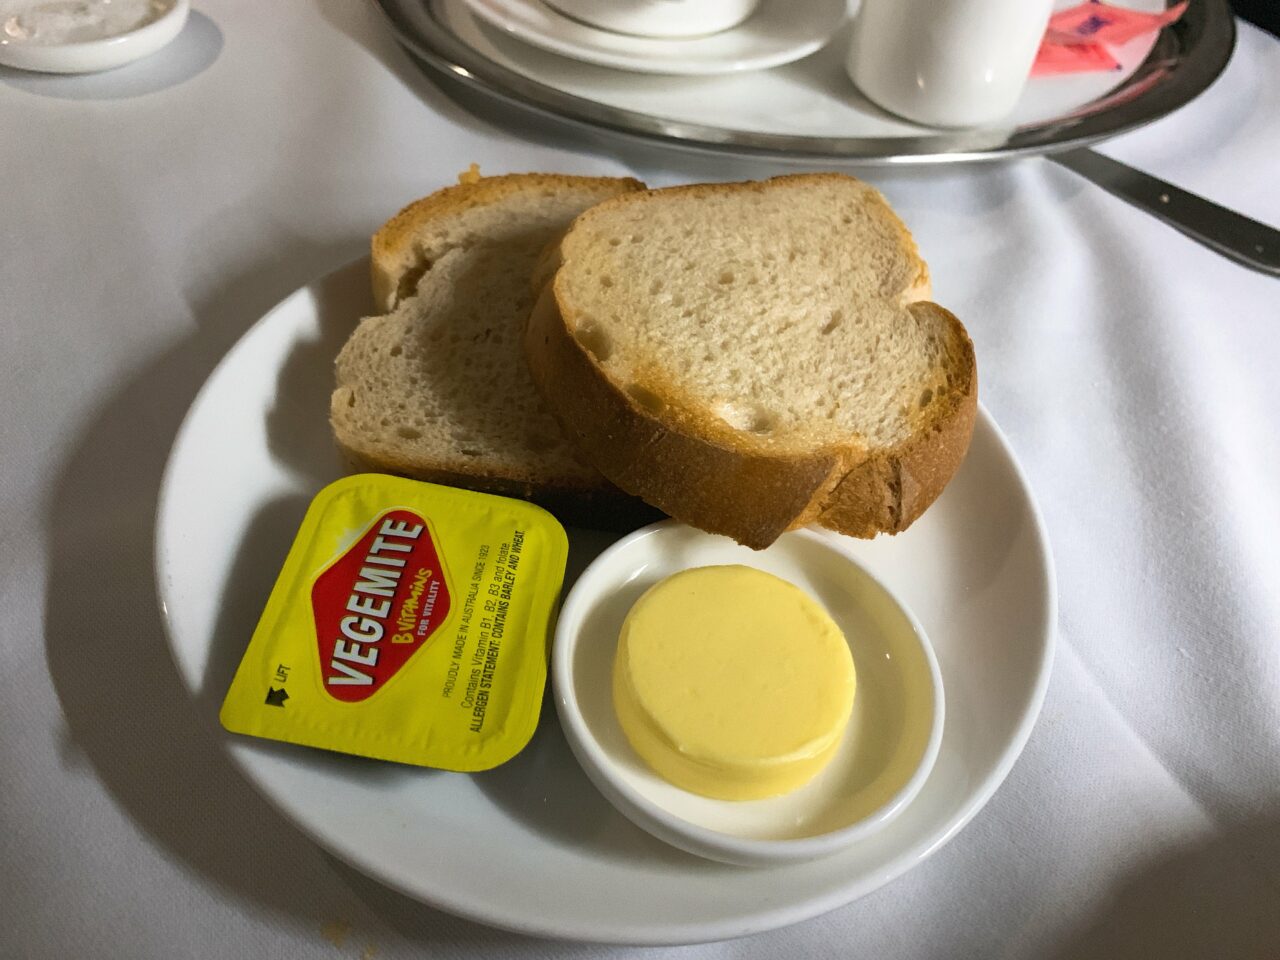 bread and toast 